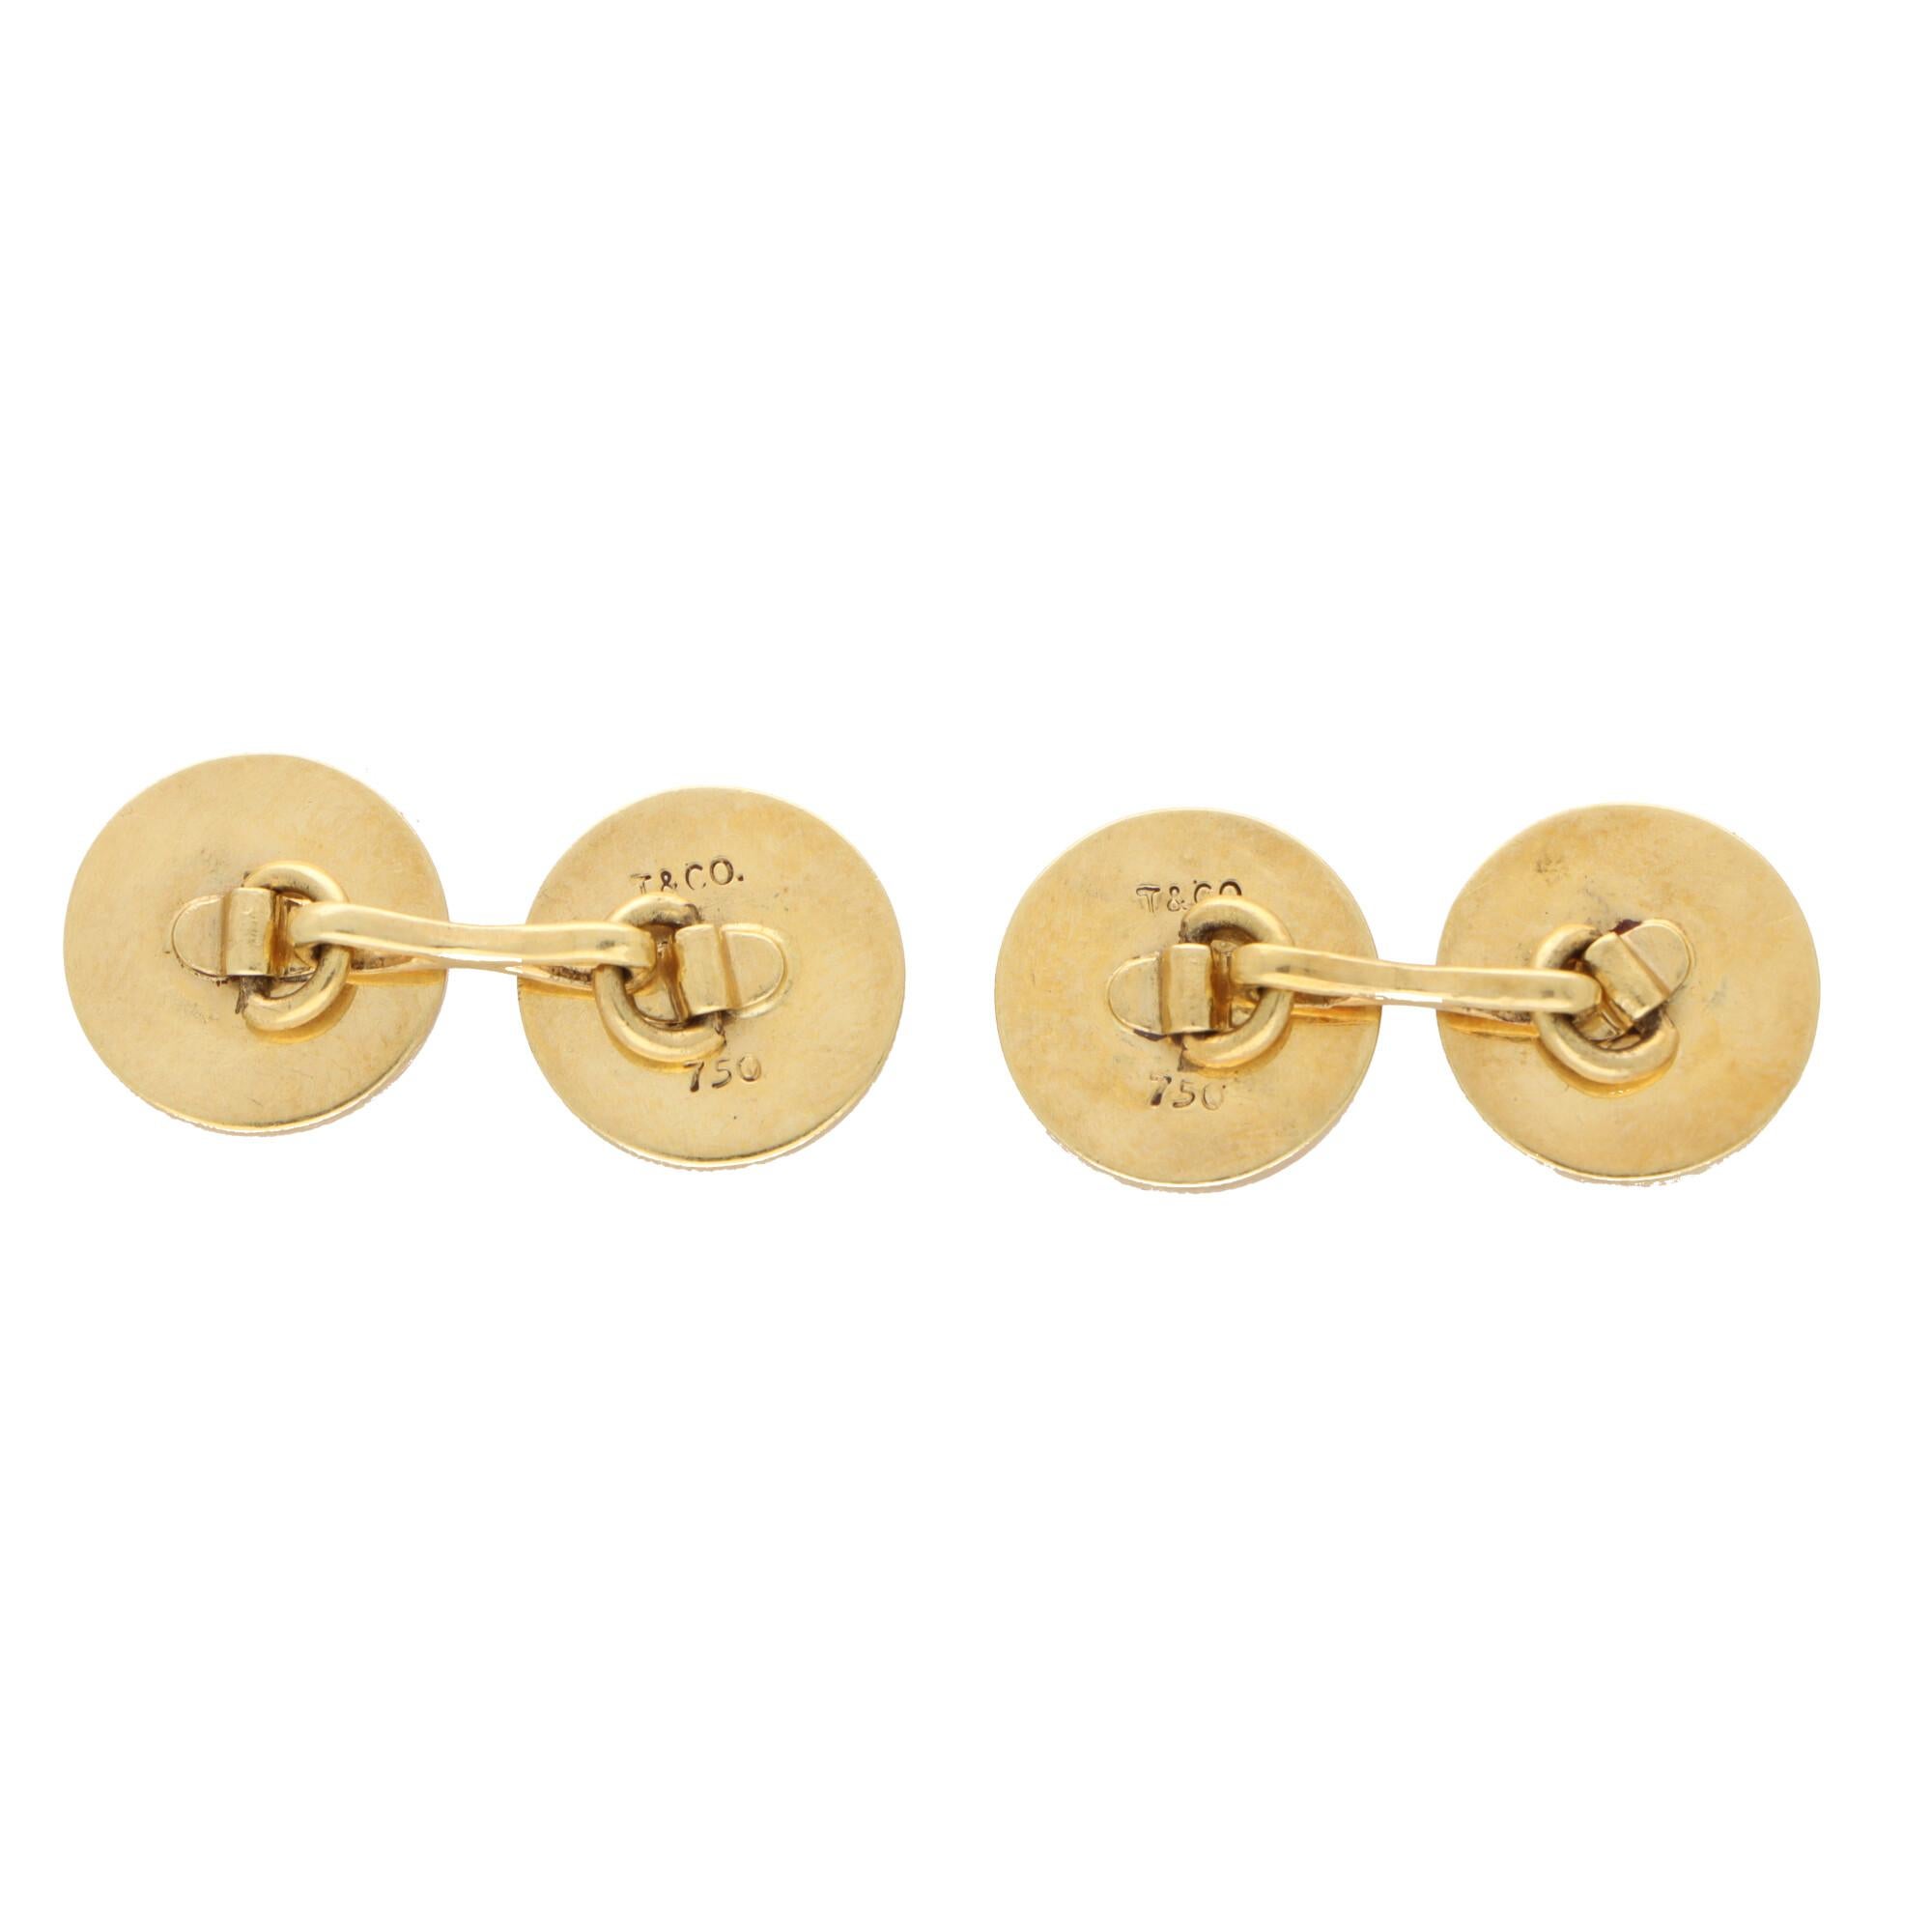  A stylish pair of vintage Tiffany & Co. lapis lazuli cufflinks crafted in solid 18k yellow gold.

The cufflinks are made from solid 18k yellow gold and depict two circles on a sturdy chain bar fitting. Set centrally to each cufflink face is a disc